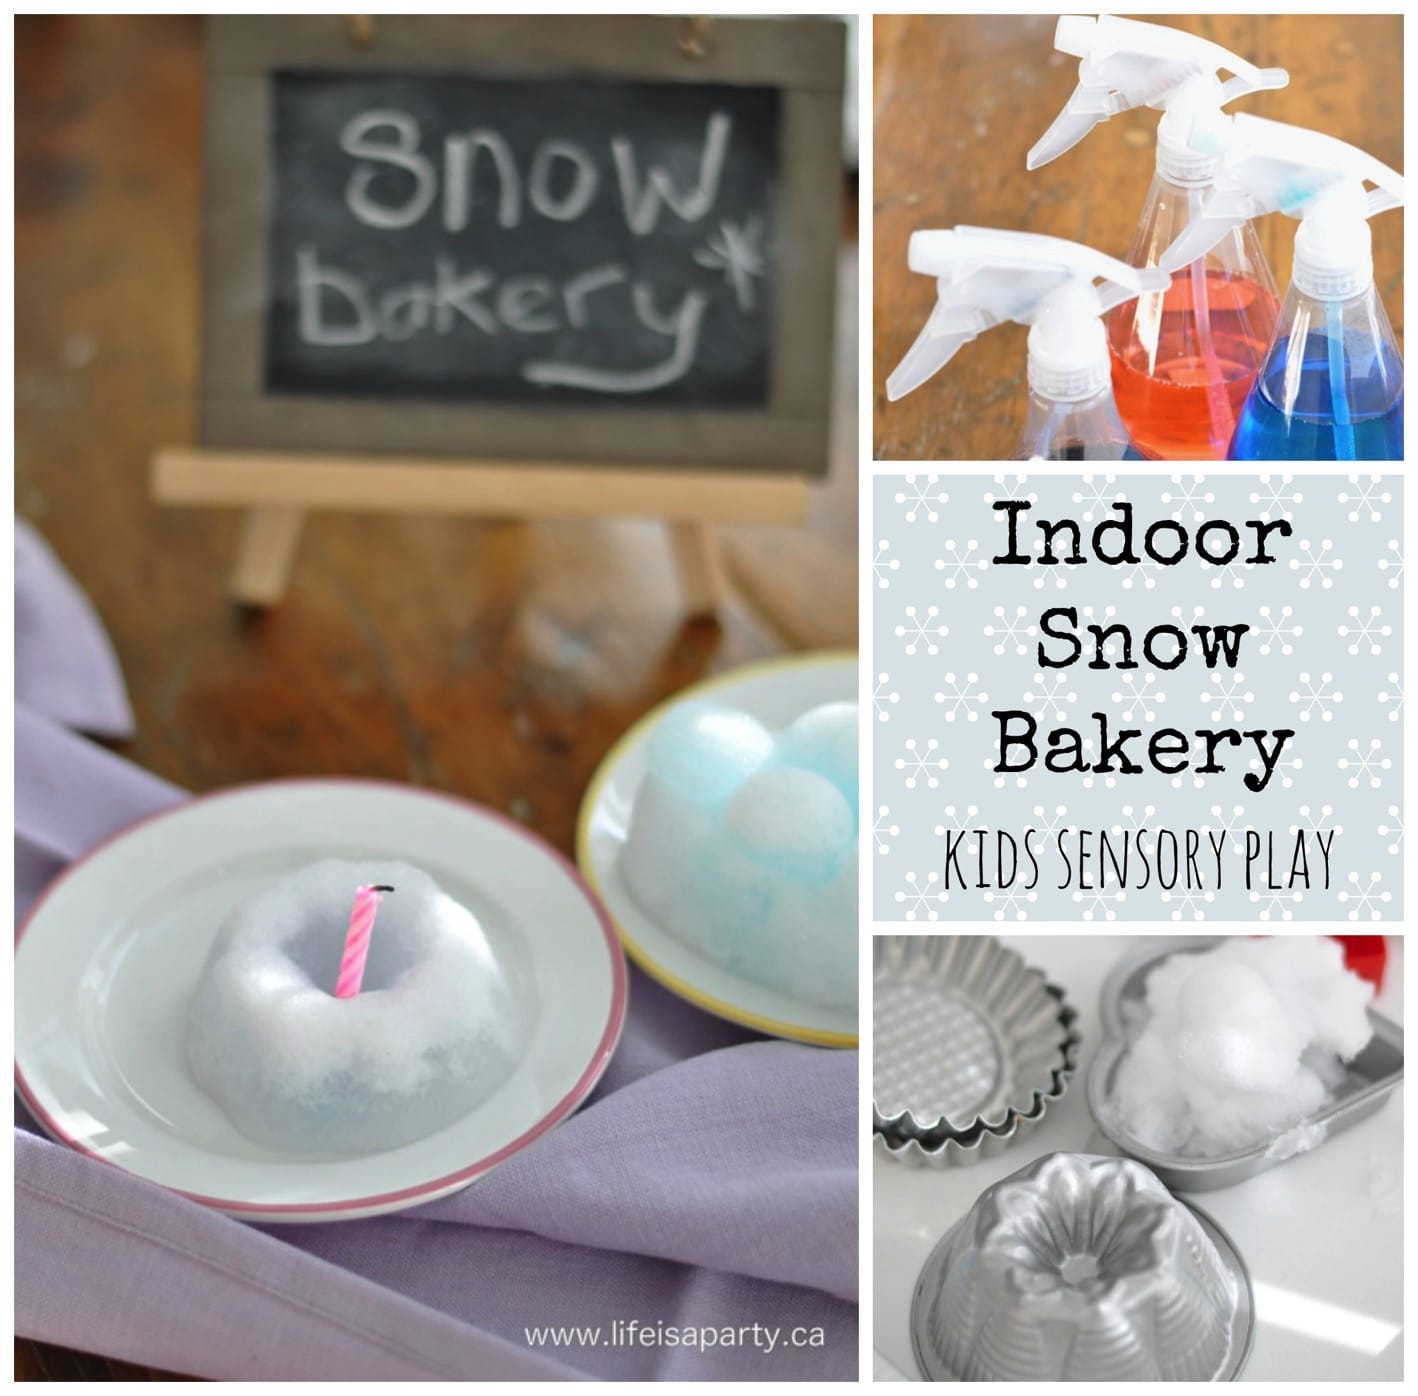 Snow Bakery Sensory Play Ideas: bring the snow inside, add some food colouring, and toy dishes and make a snow bakery kids will love.